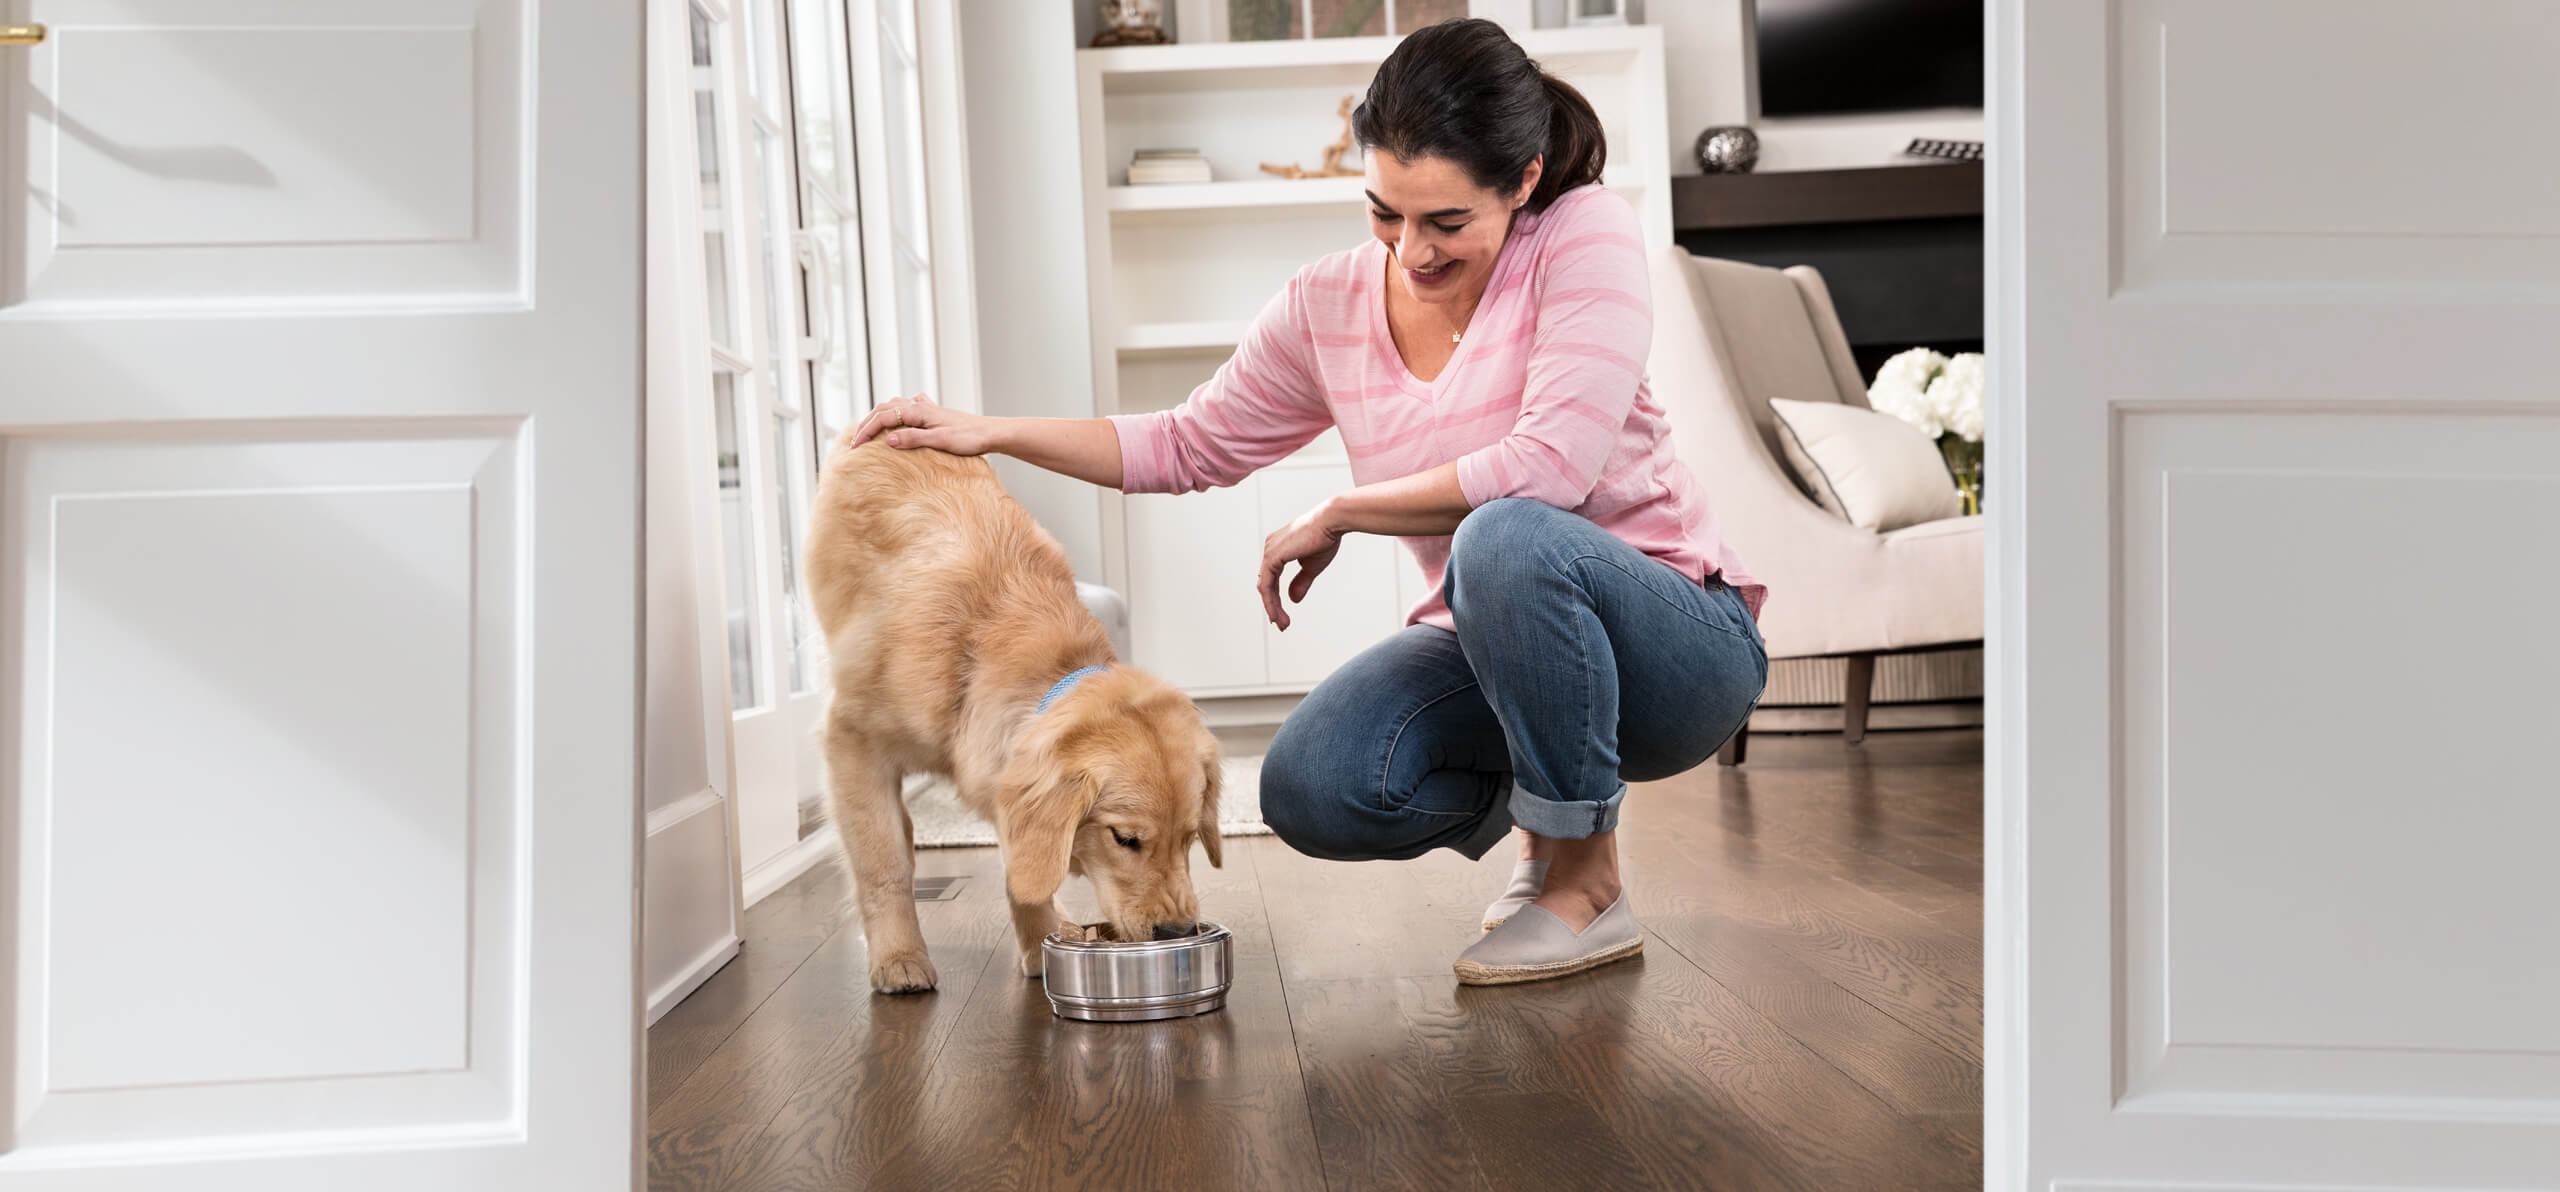 dog being petted by woman as it eats out of its bowl